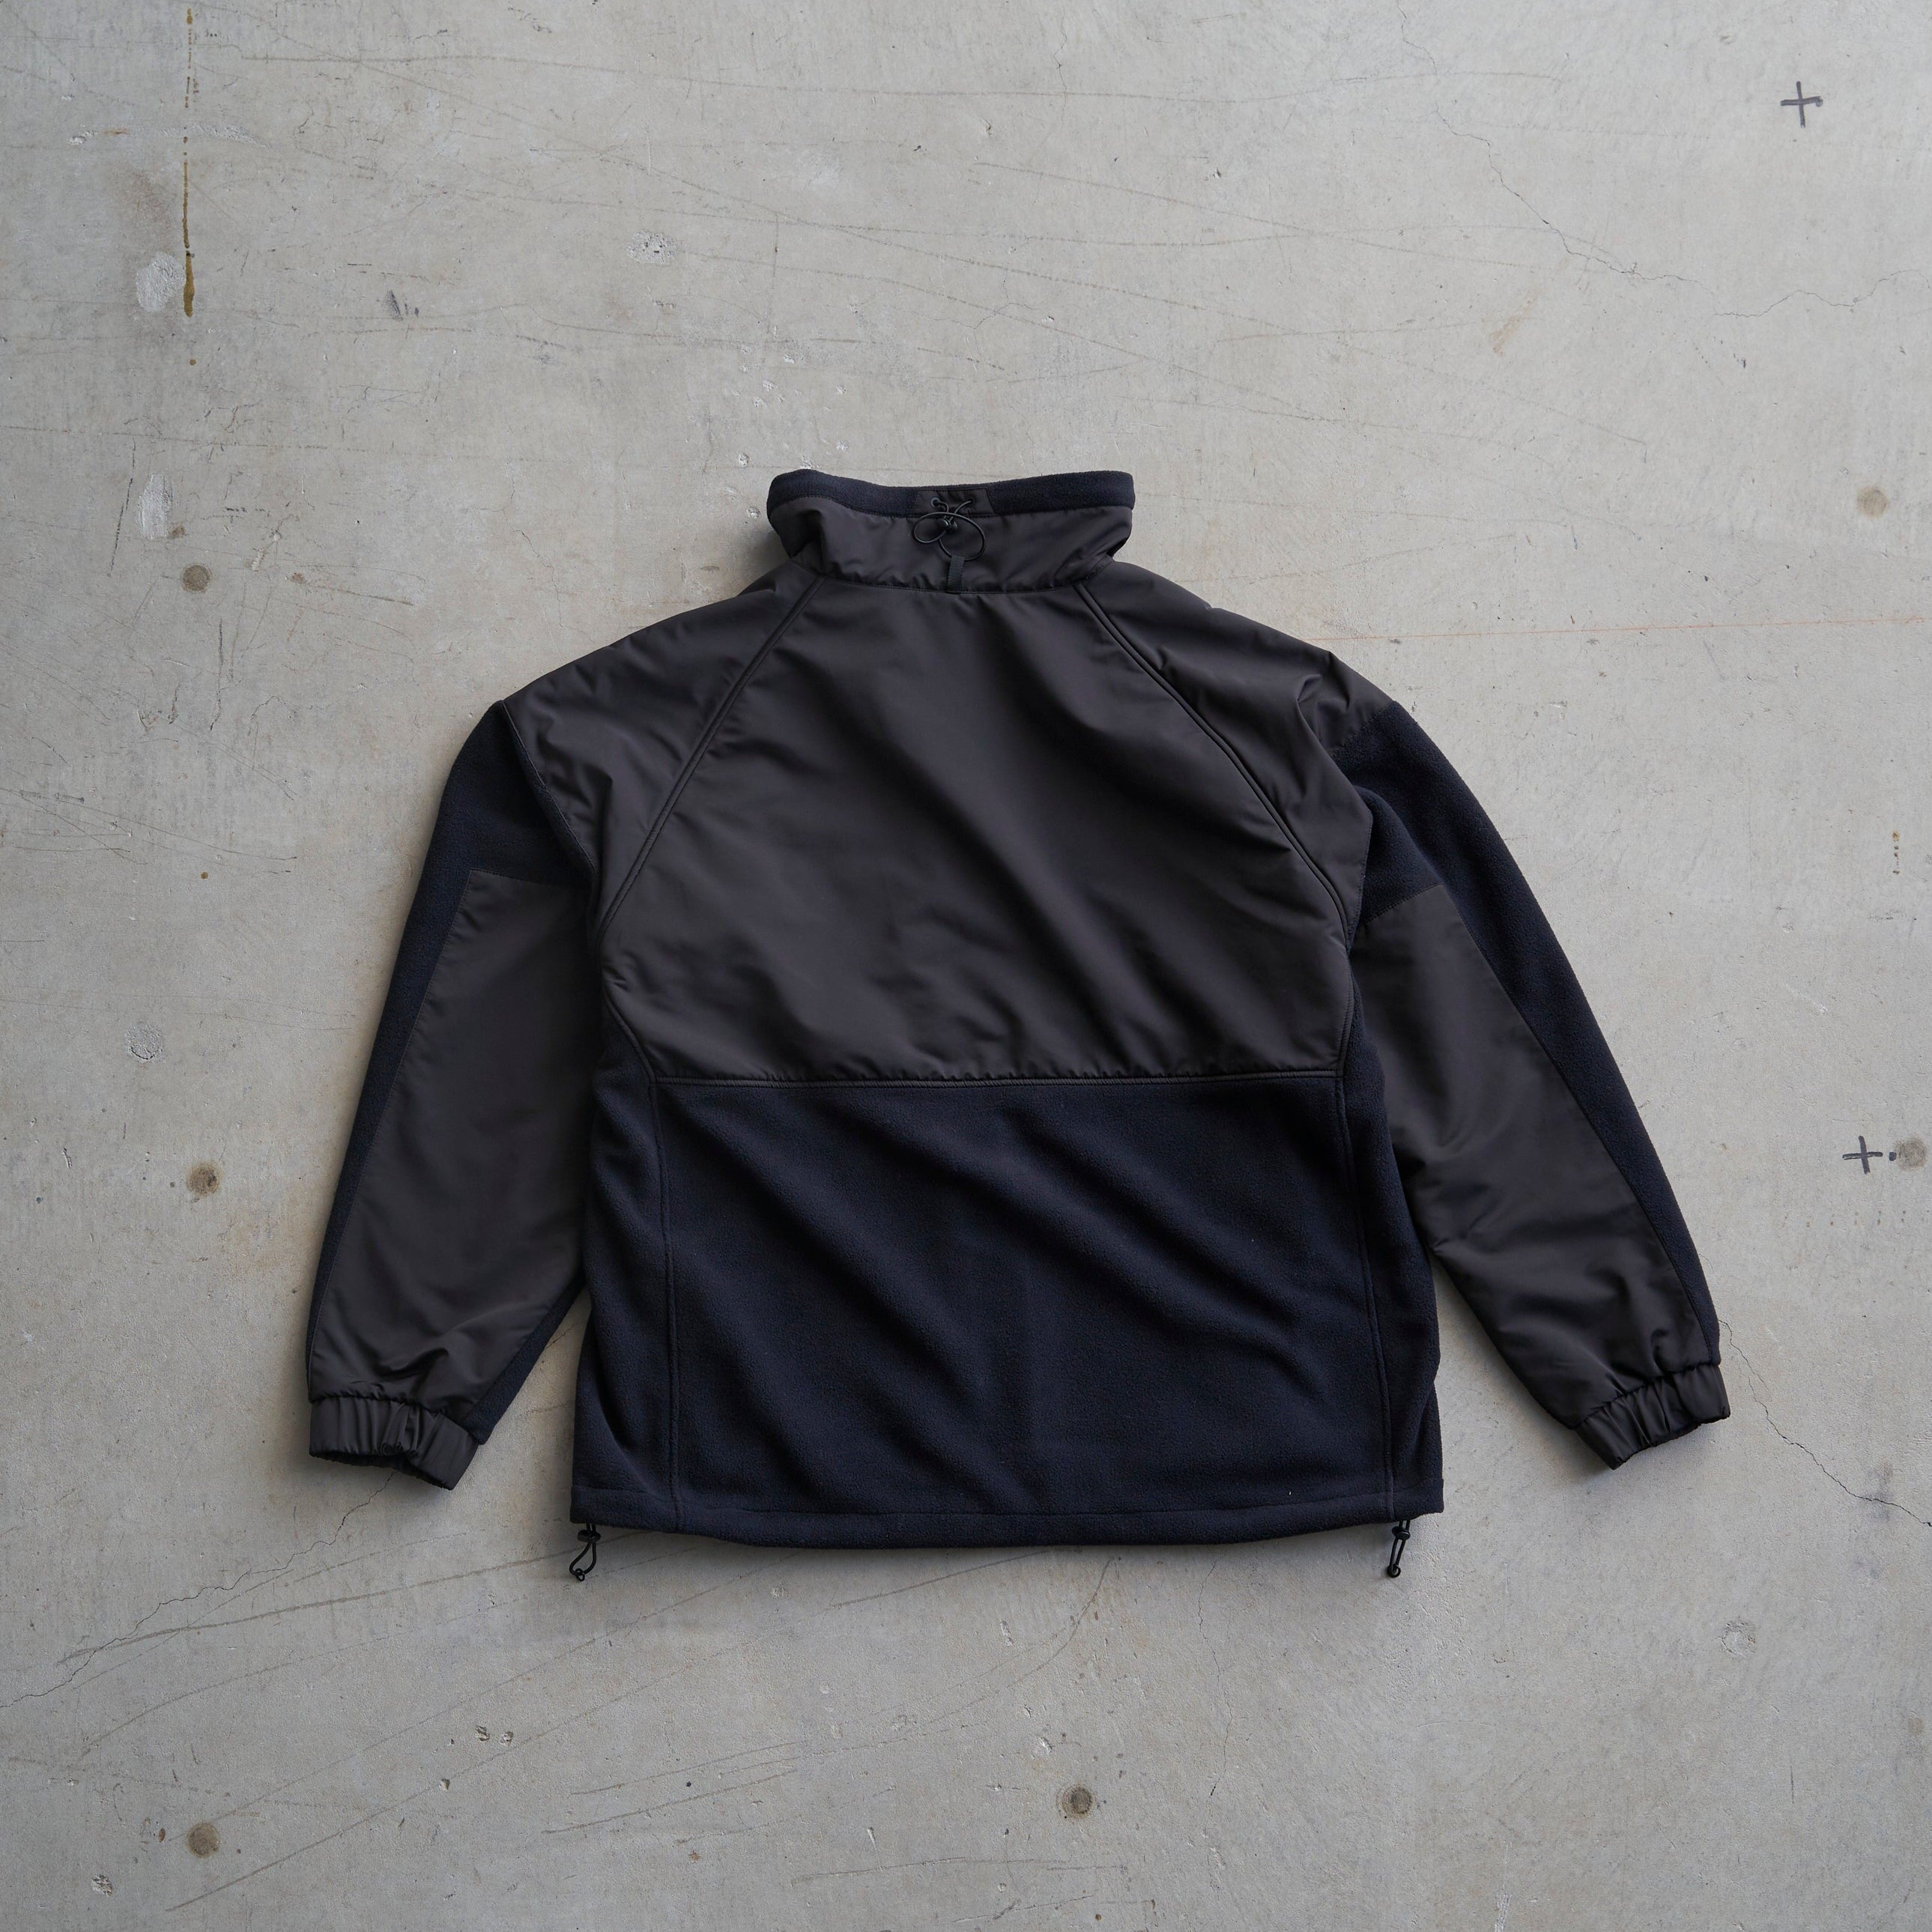 Y(dot) BY NORDISK / STAND NECK FLEECE JACKET